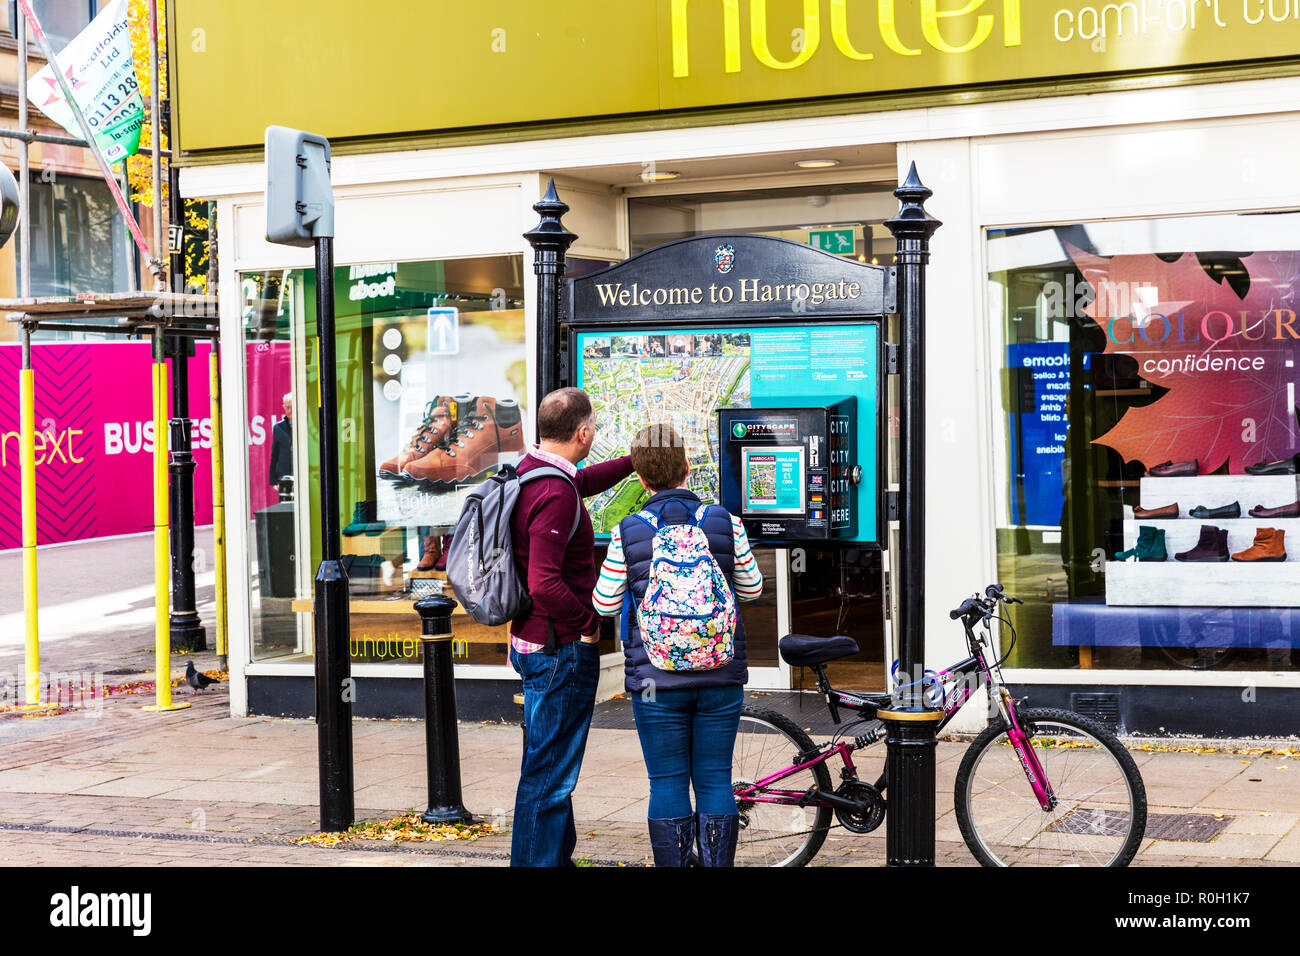 Harrogate town Centre, Yorkshire UK England, Welcome to Harrogate sign, City maps Harrogate, Looking at city map, working out directions, Harrogate UK Stock Photo